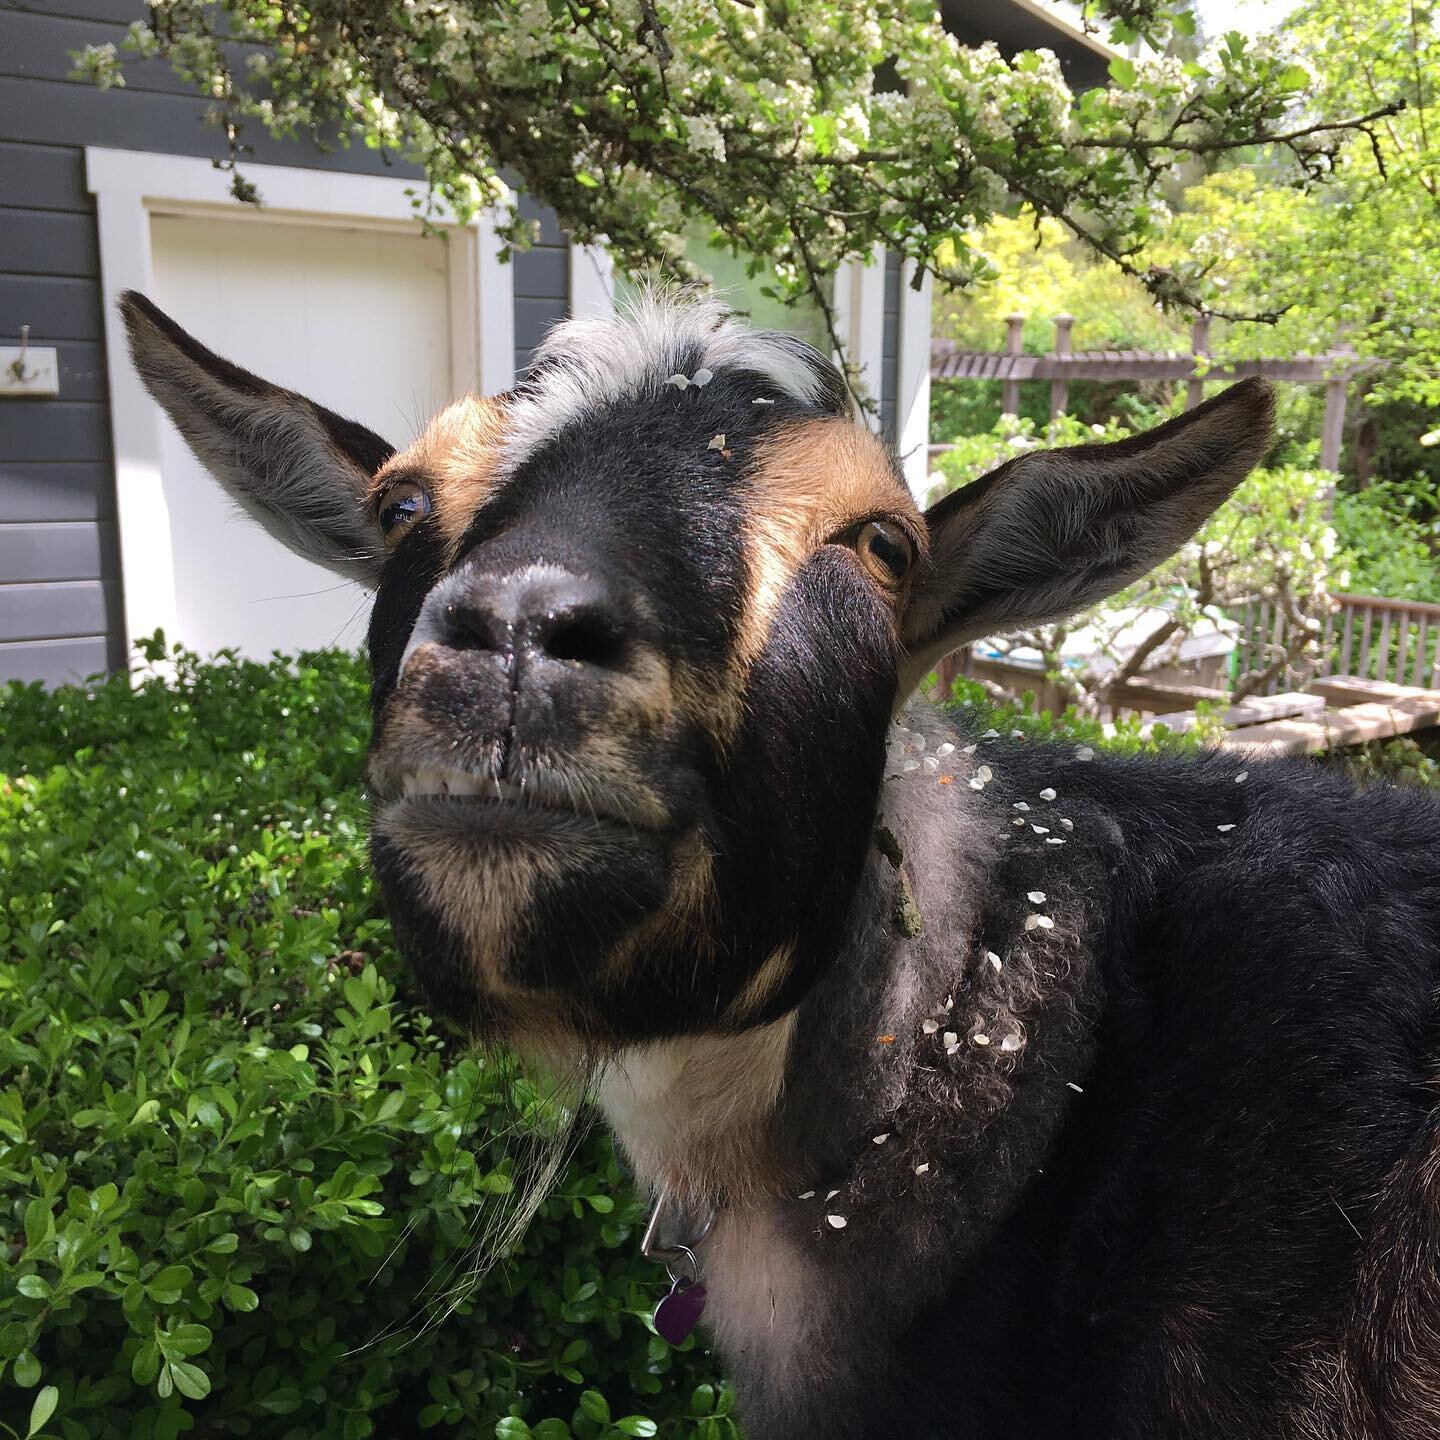 Our goats can come to your zoom event or meeting too! Handsome and charming, they never need to &ldquo;touch up their appearance&rdquo;. Send us a message to schedule. #clubhousecuddles #goatsonzoom